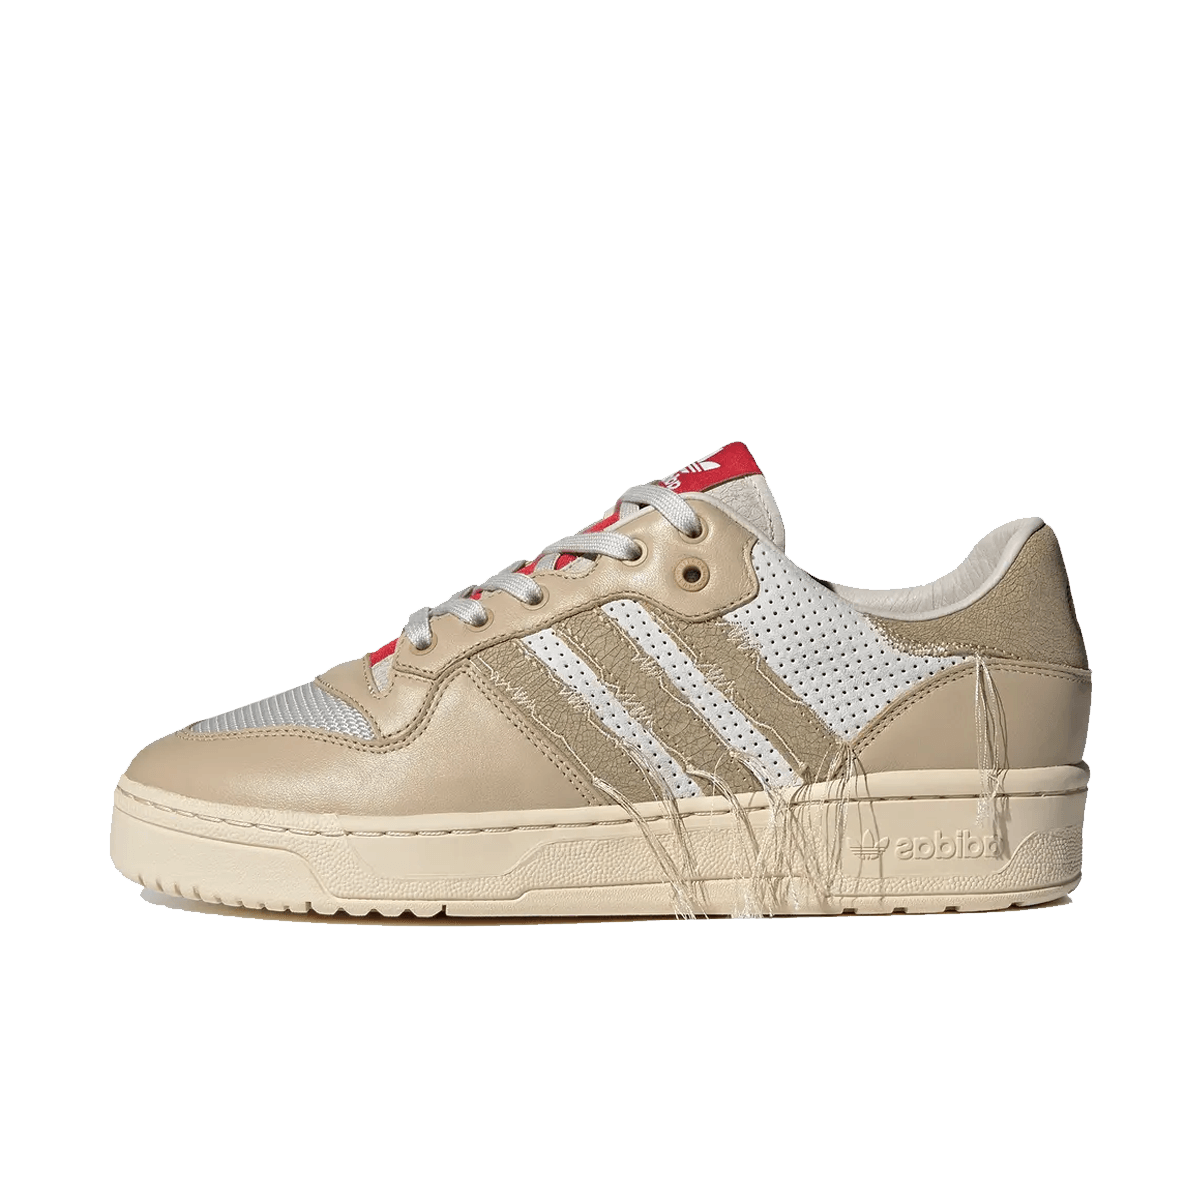 Extra Butter x adidas Rivalry Low 'Talc' - Consortium Cup ID8805